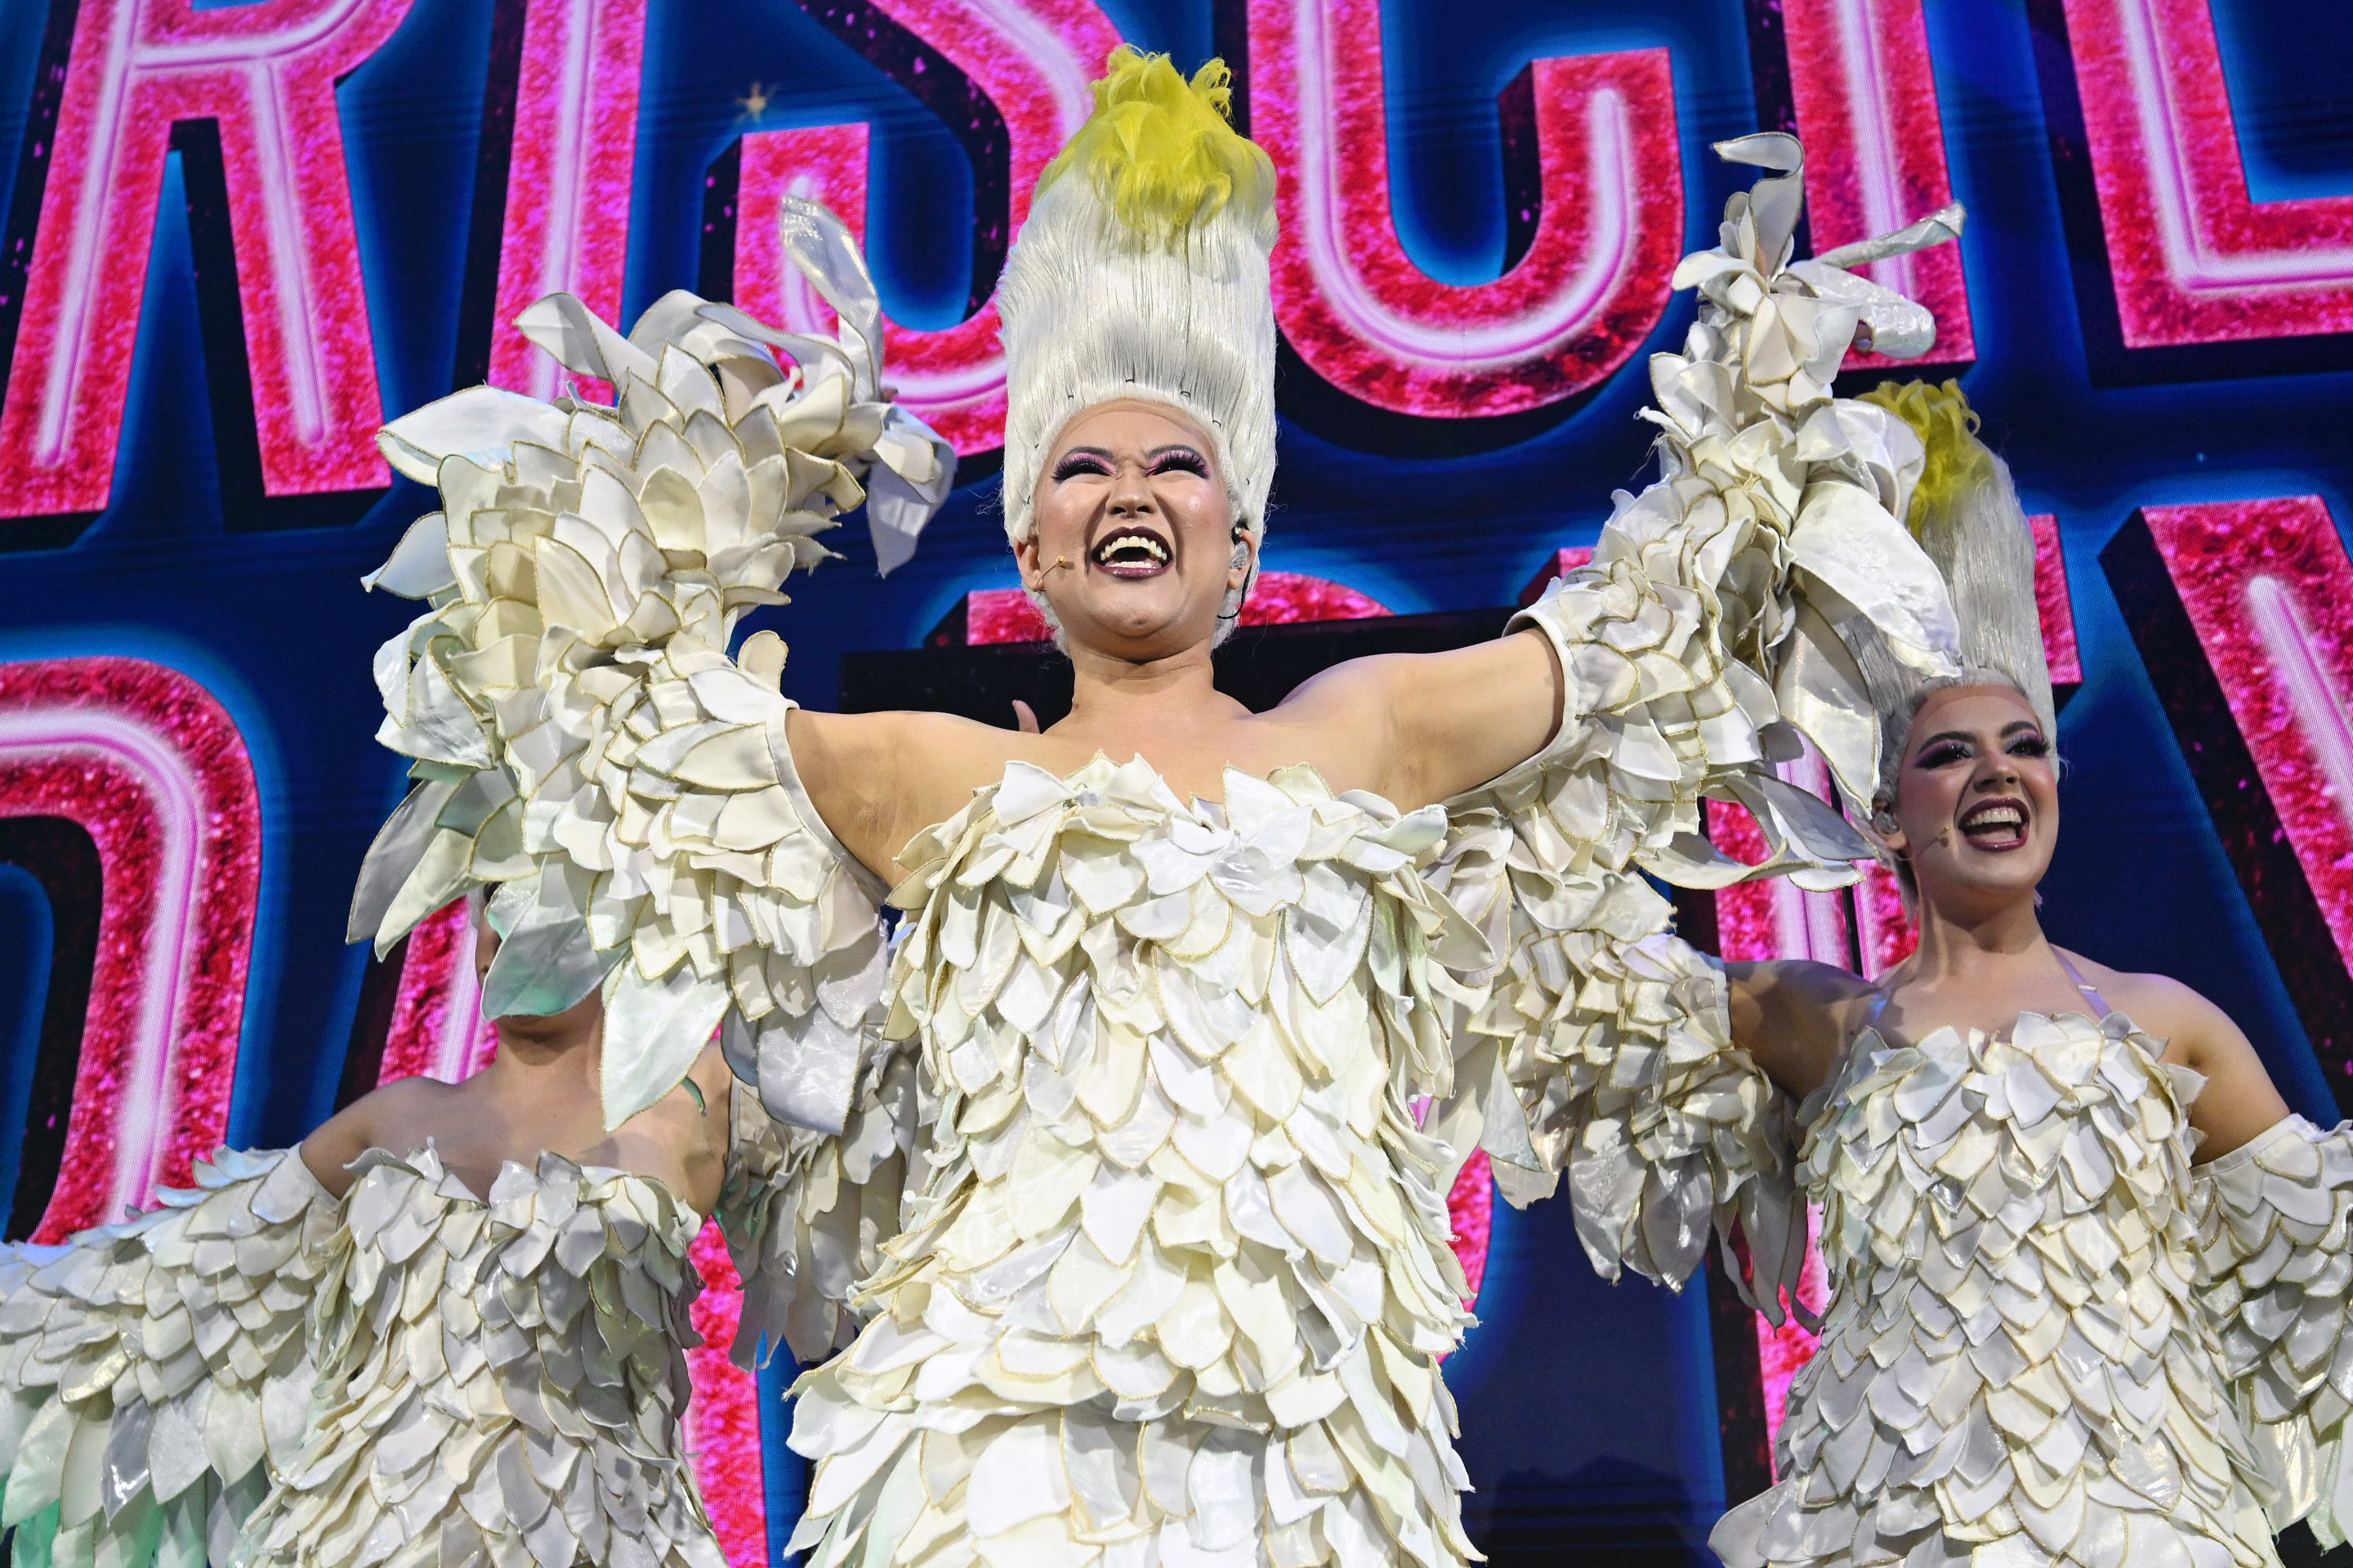 Priscilla The Party! will close four months early, in May